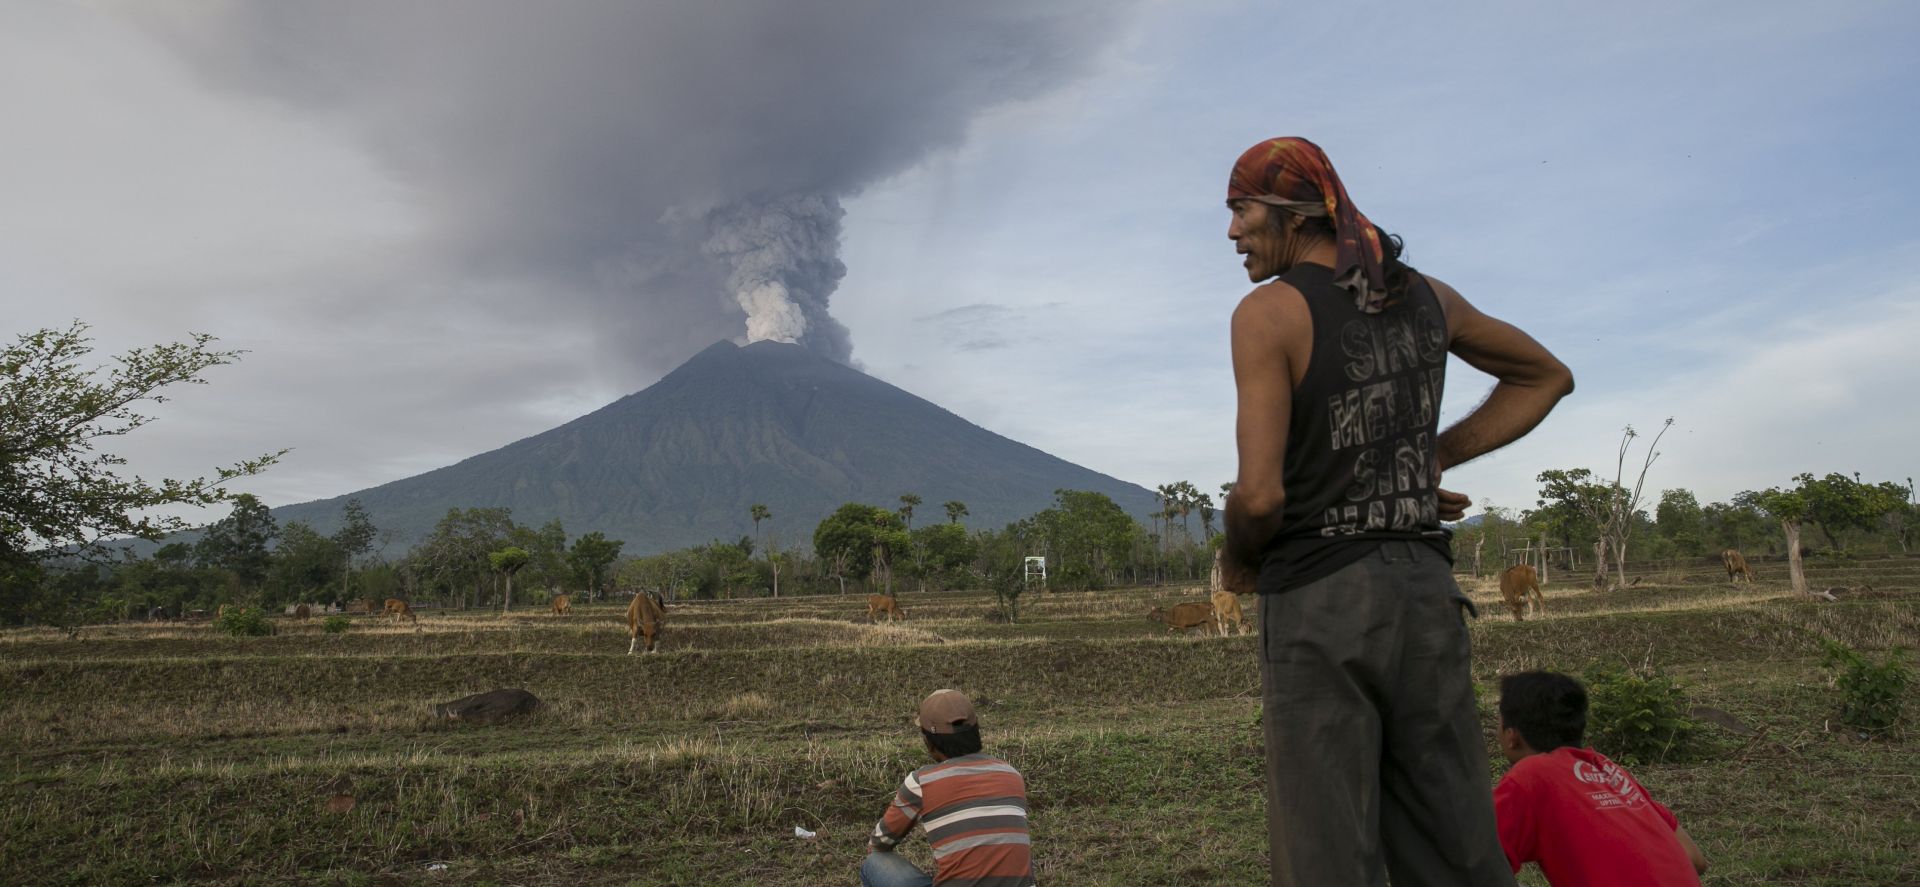 epa06353156 The Mount Agung volcano spews hot volcanic ash, as seen from Datah, Karangasem, Bali, Indonesia, 27 November 2017. According to media reports, the Indonesian national board for disaster management raised the alert for the Mount Agung volcano to the highest status and closed the Ngurah Rai International Airport in Bali due to the ash cloud rising from the volcano.  EPA/MADE NAGI